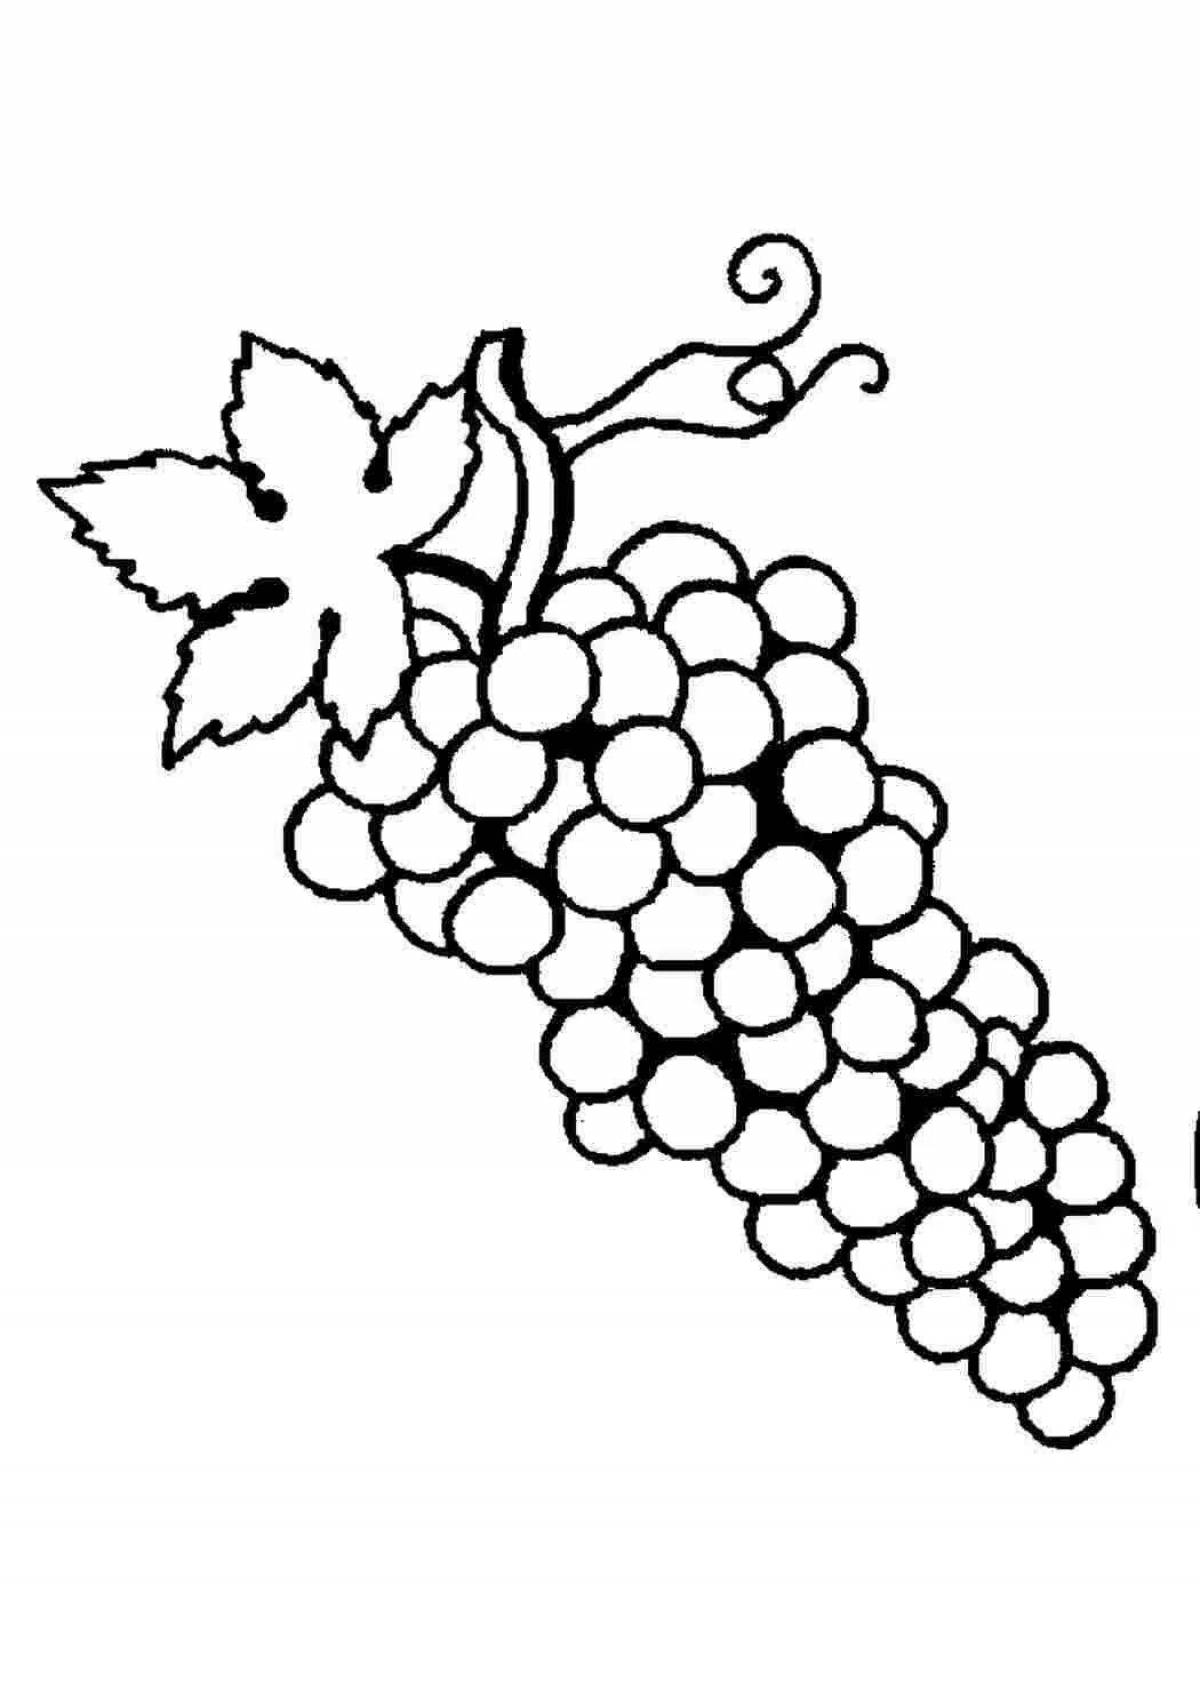 Wonderful coloring of grapes for kids